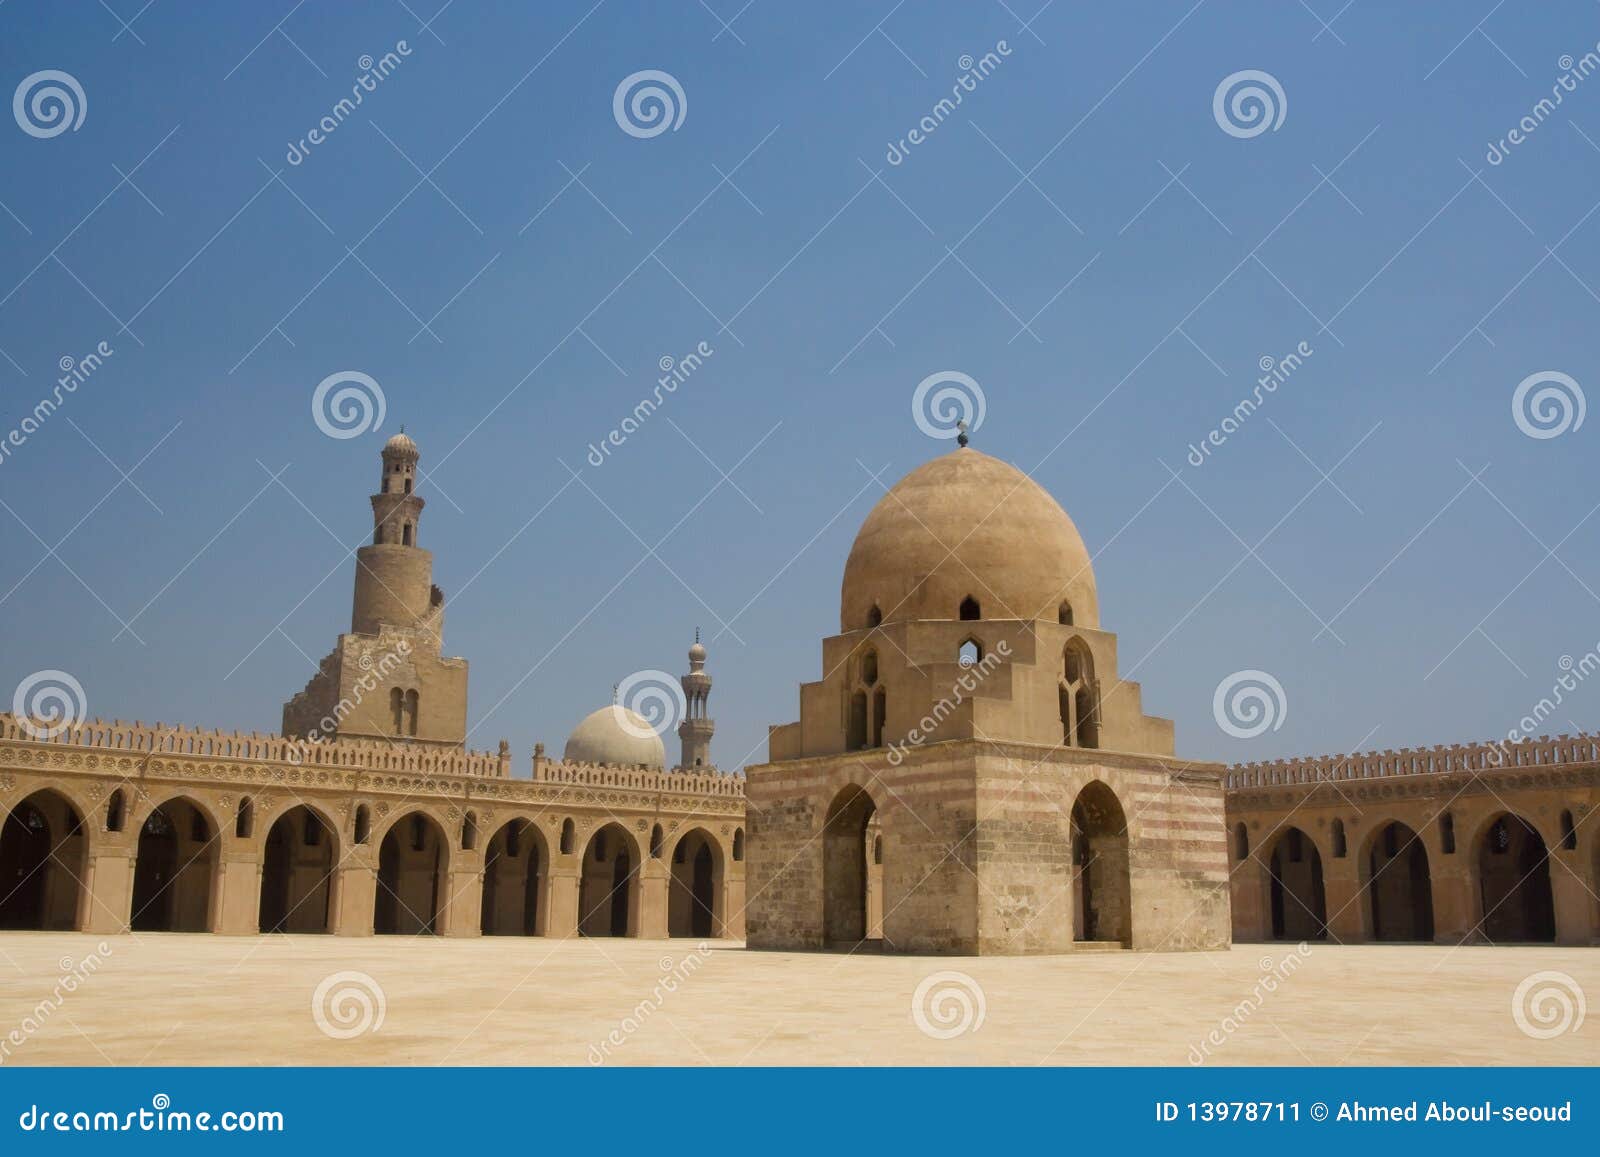 ahmed ibn tulun mosque in cairo, egypt